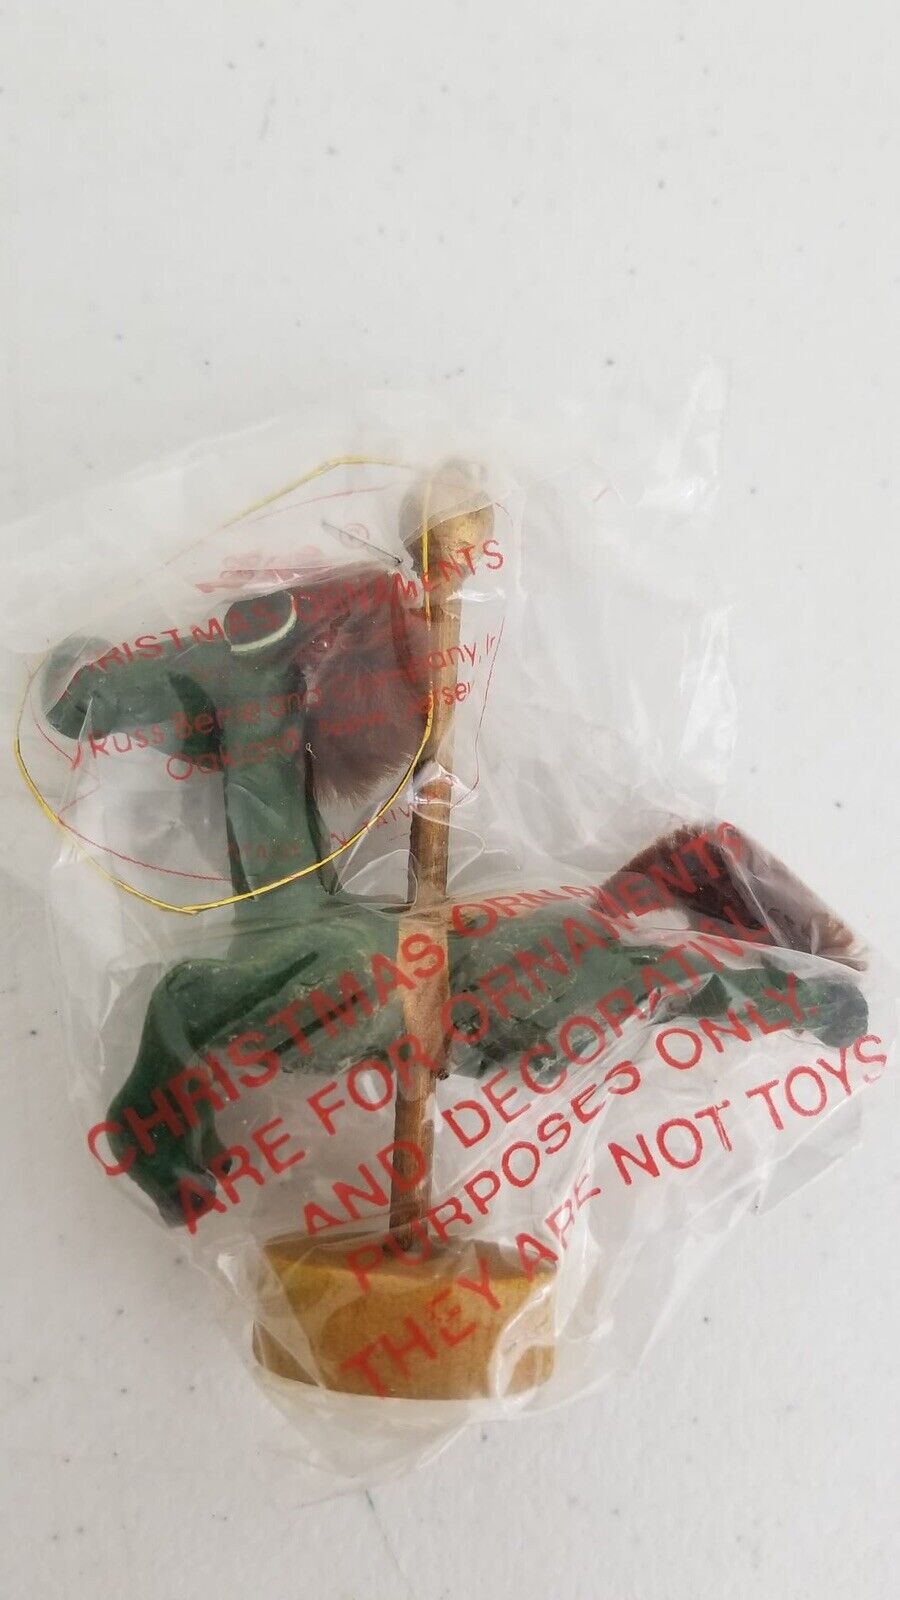 Rare Vintage Christmas Ornaments Set of 3 - Handcrafted Wooden Collectibles in Original Sealed Packaging - TreasuTiques